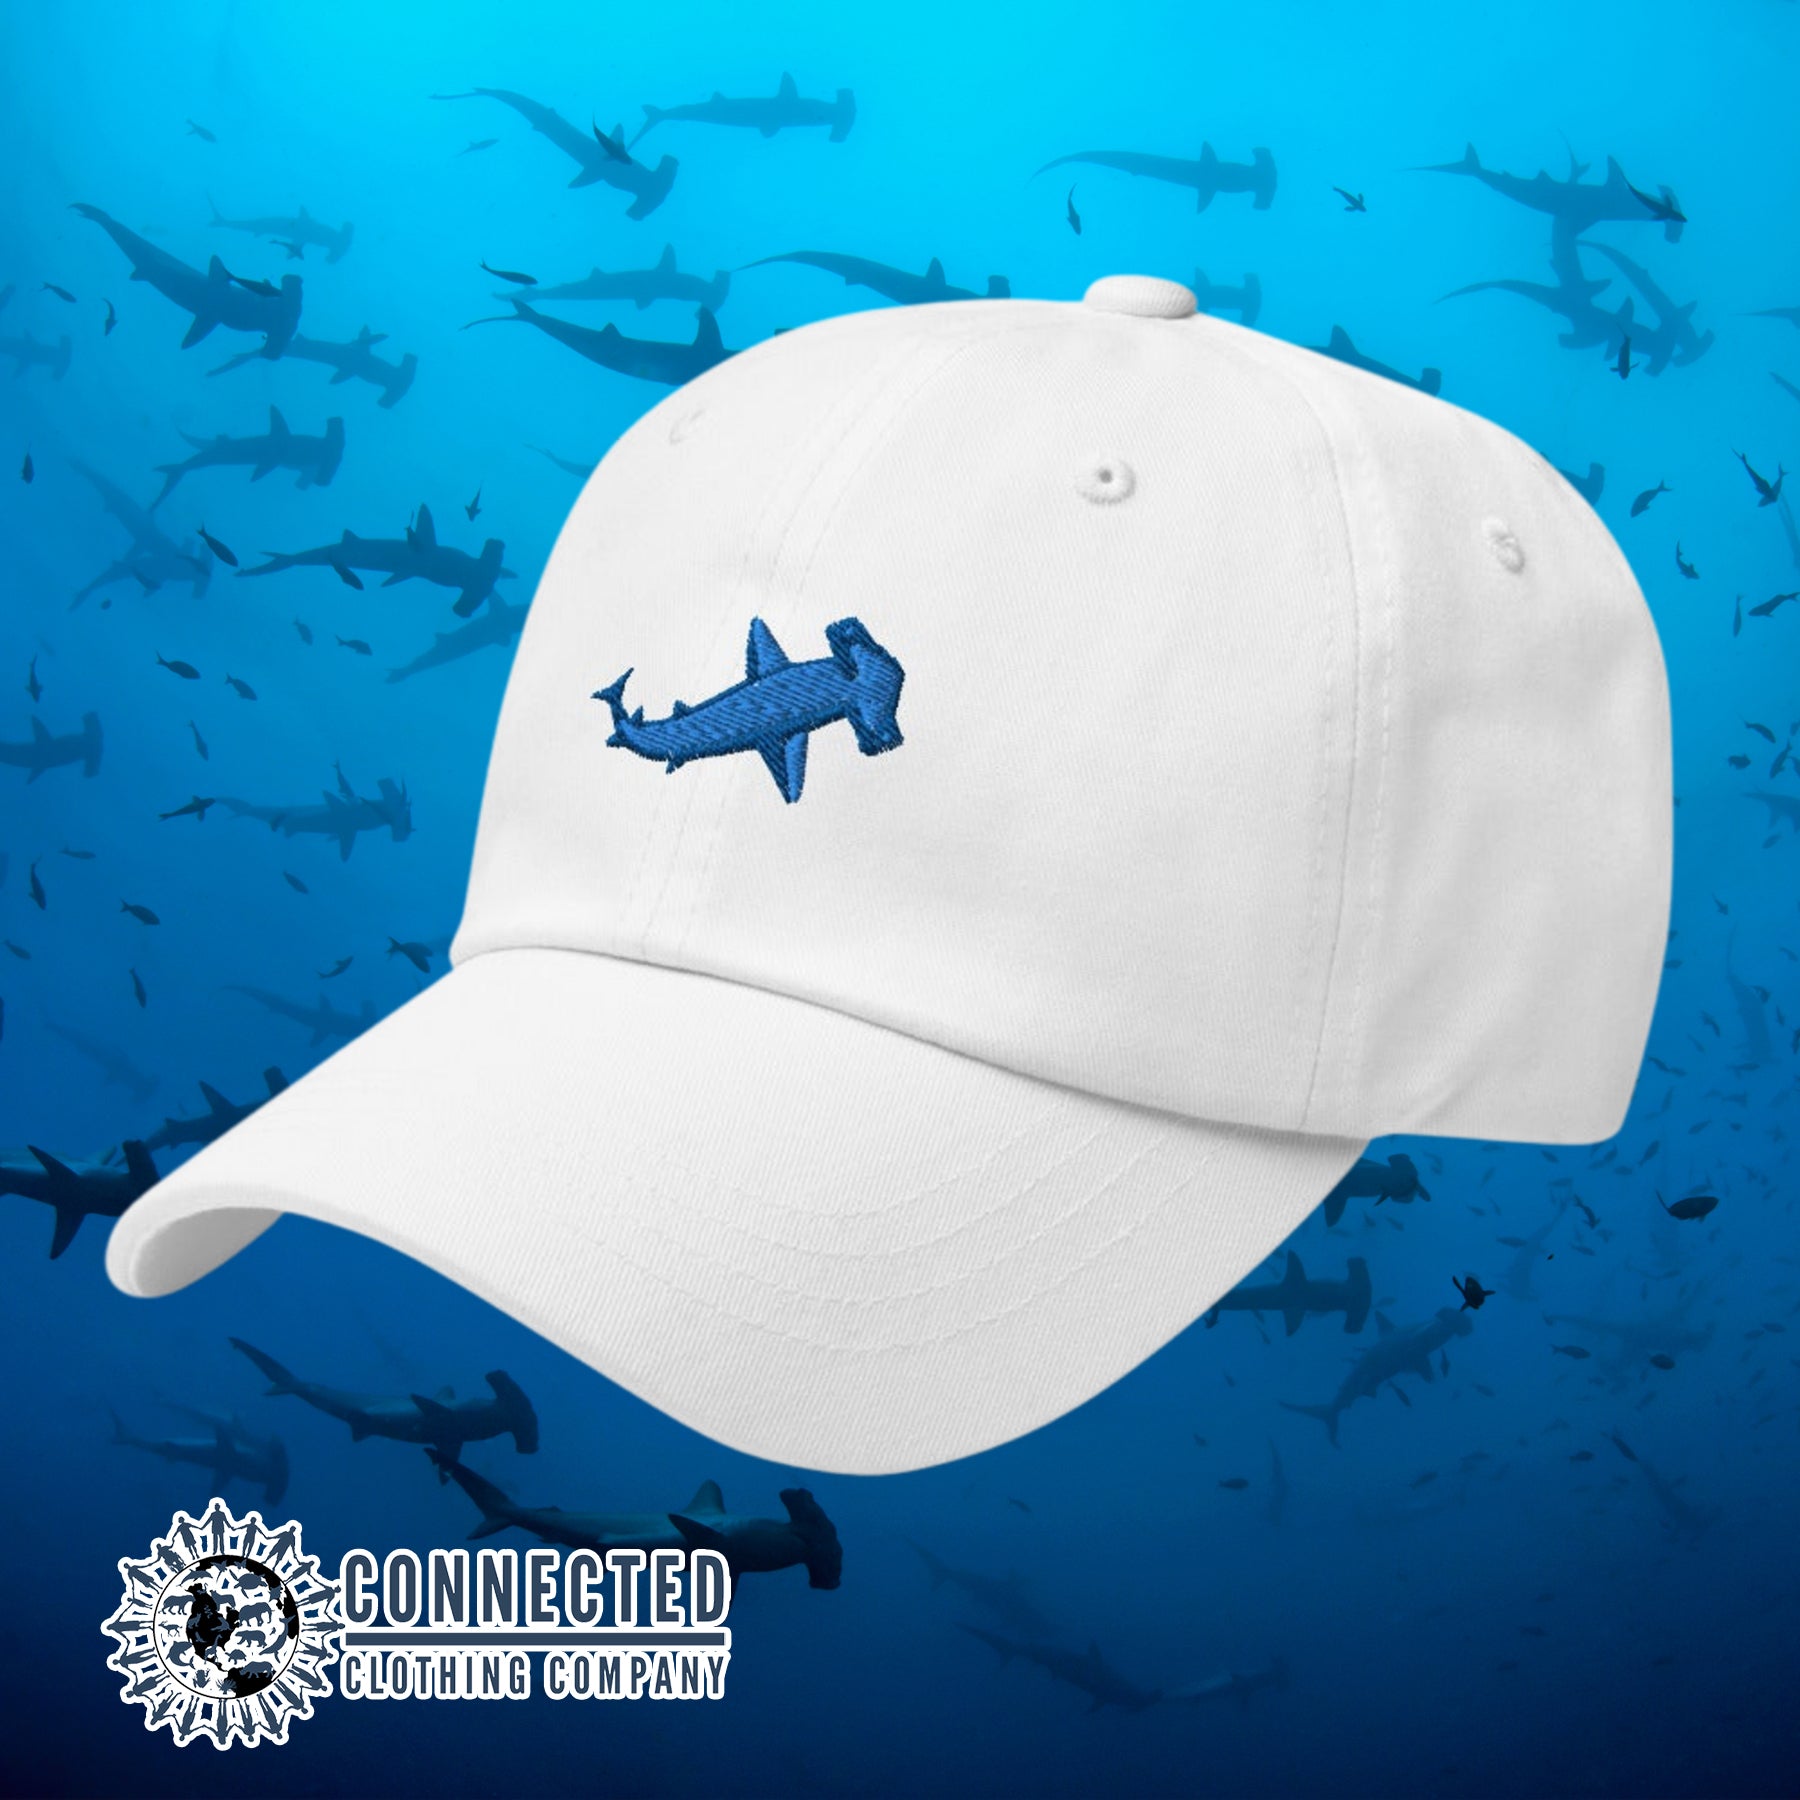 White Hammerhead Shark Cotton Cap - Connected Clothing Company - Ethical & Sustainable Clothing That Gives Back - 10% donated to Oceana shark conservation